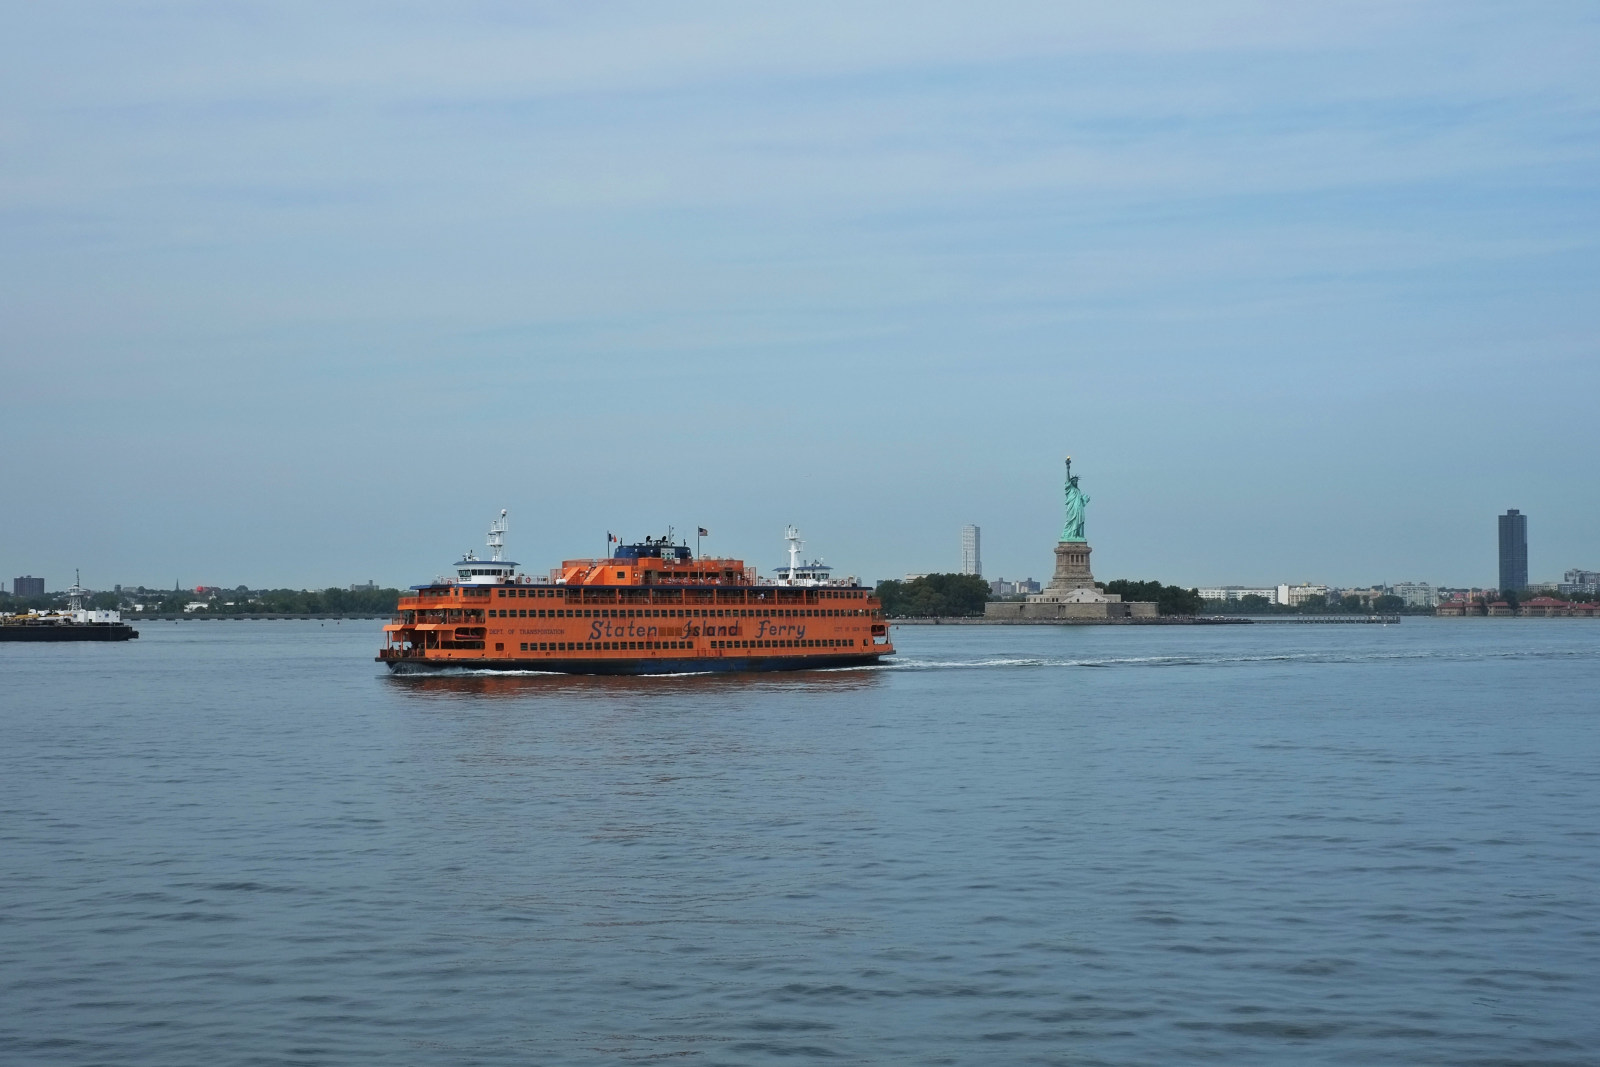 Staten Island Ferry, Statue of Liberty - a day trip and views from the iconic Staten Island Ferry